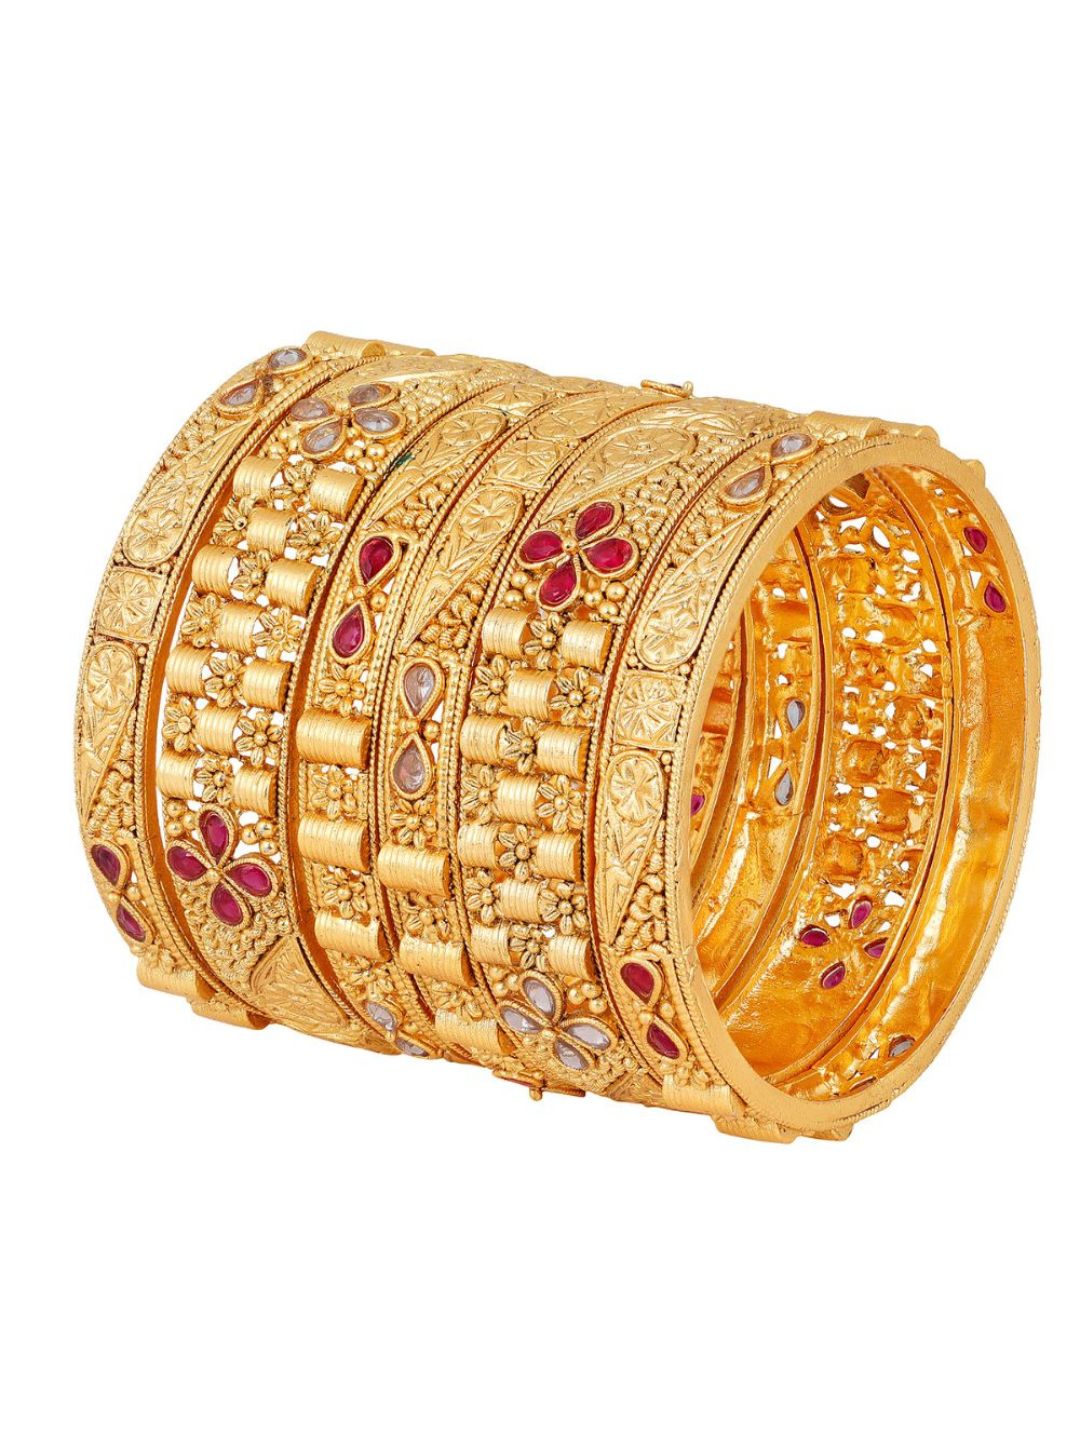 ACCESSHER Matte Gold Plated Ethnic Inspired Semi Pecious Stones Embedded Floral Design Rajwadi Style Statement Kada/Bangles Pack of 6 for Women and Girls